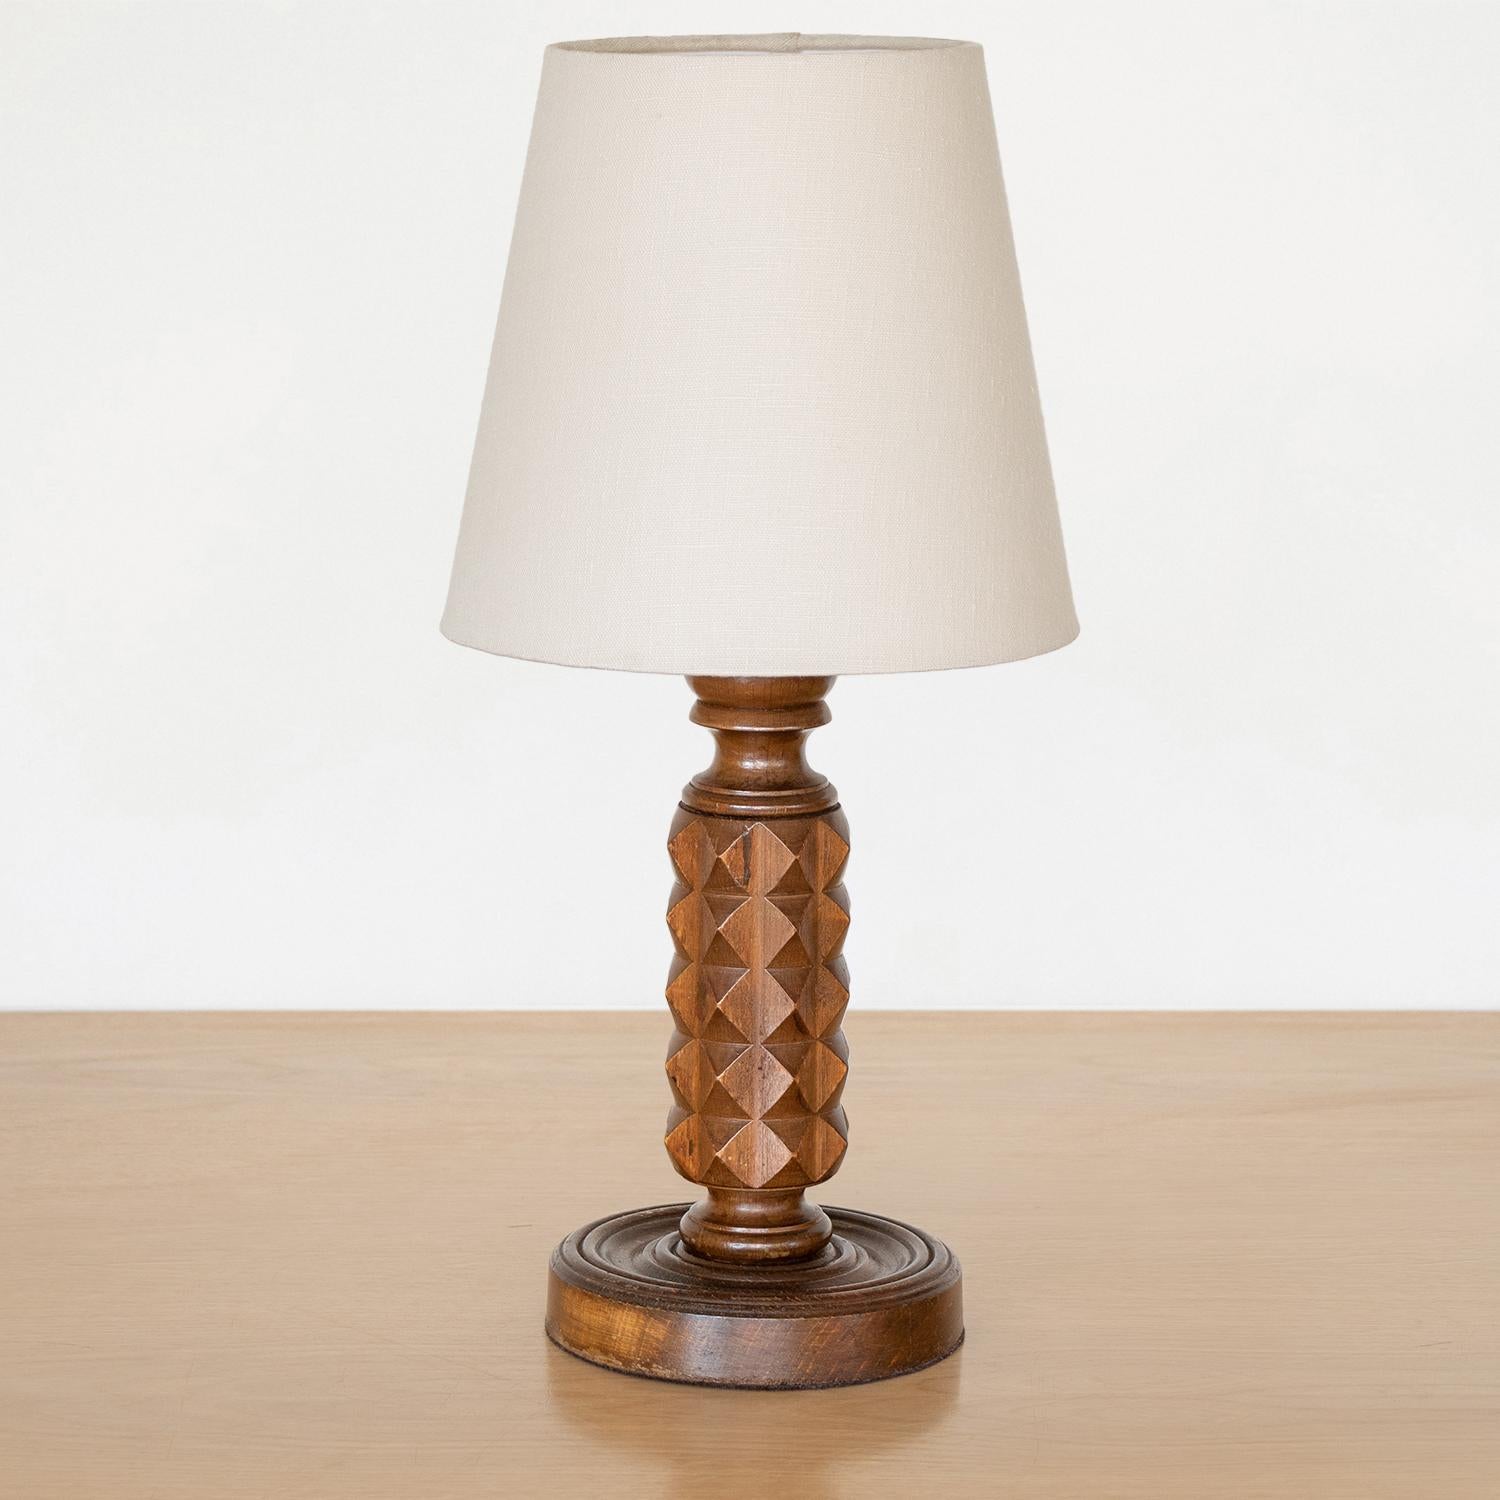 Carved wood table lamp from France, 1940s. Beautiful carved chevron design on stem with original dark wood finish. New ivory linen shade and newly re-wired. Takes one E12 base bulb, 40 W or higher using LED.